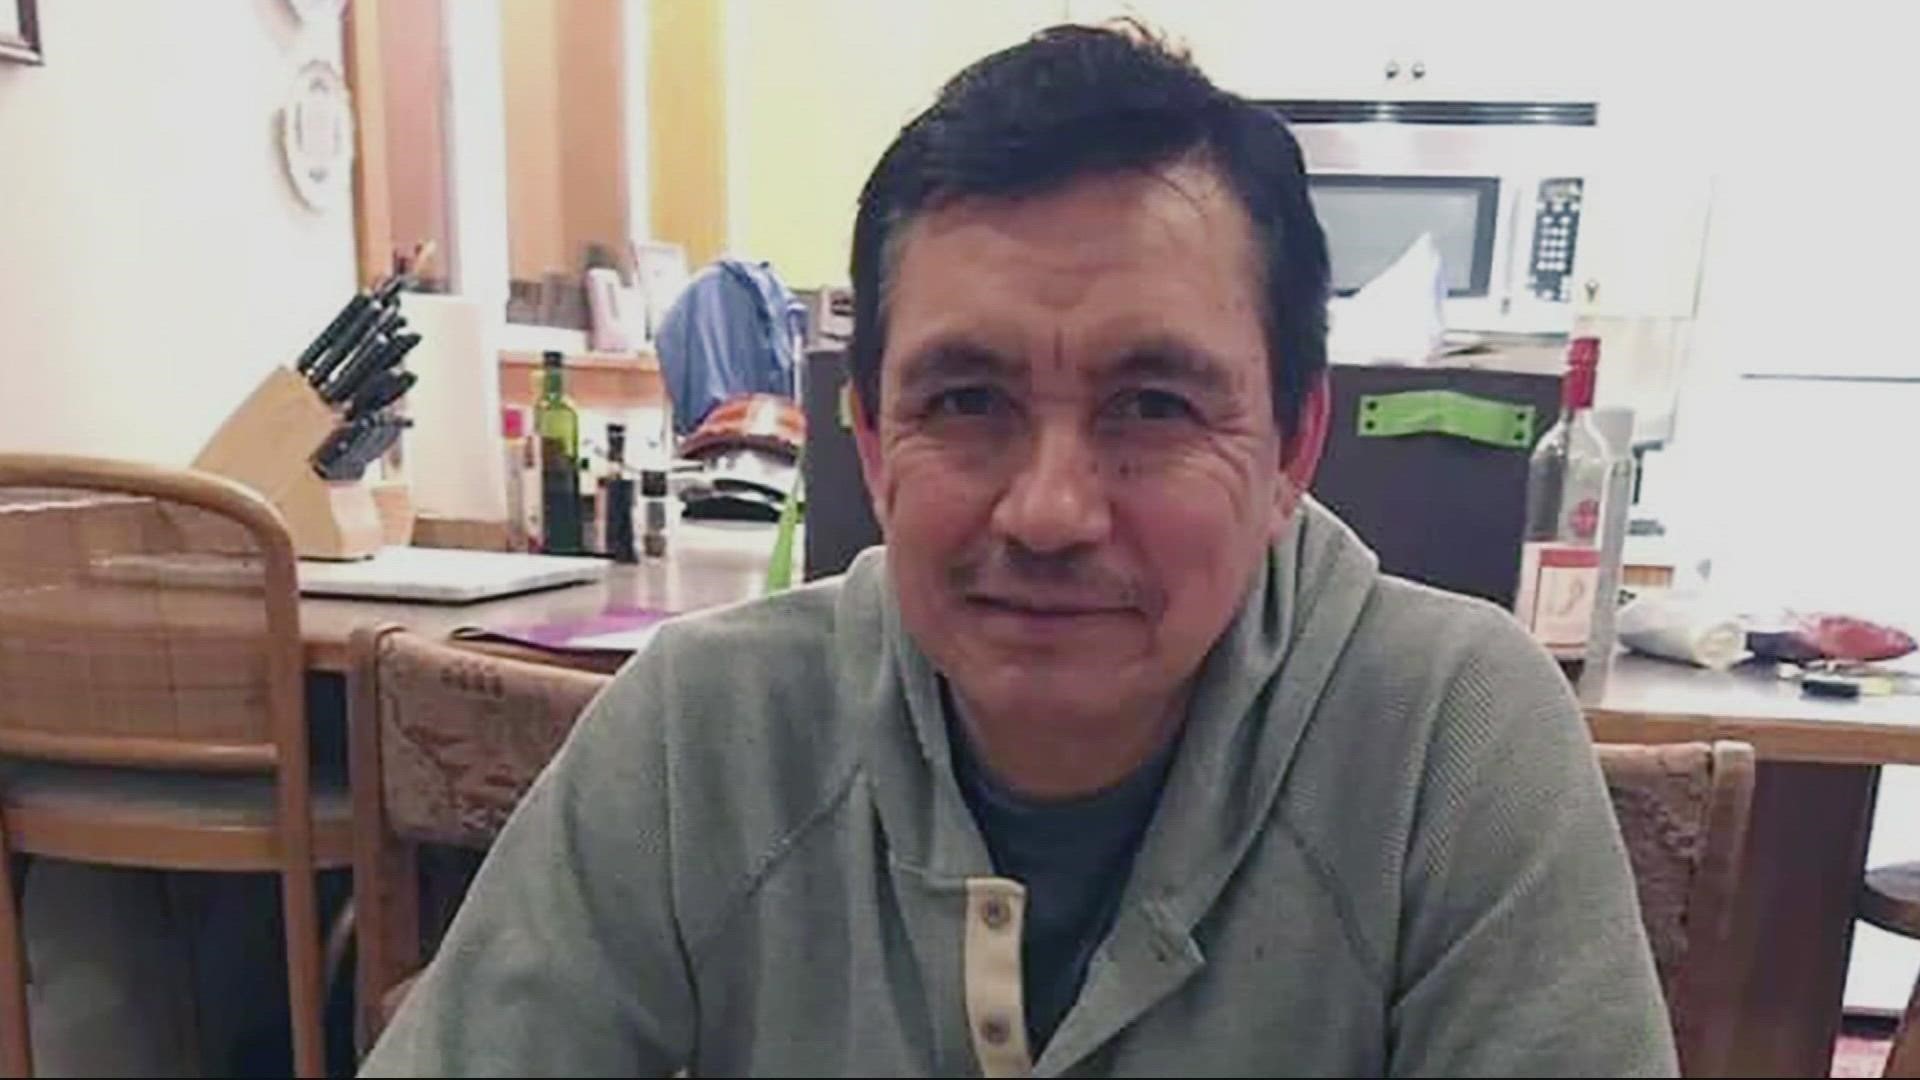 The lawsuit claims road crews failed to maintain the I-205 Glenn Jackson bridge and created an icy ramp, leading to the death of Antonio Amaro Lopez.